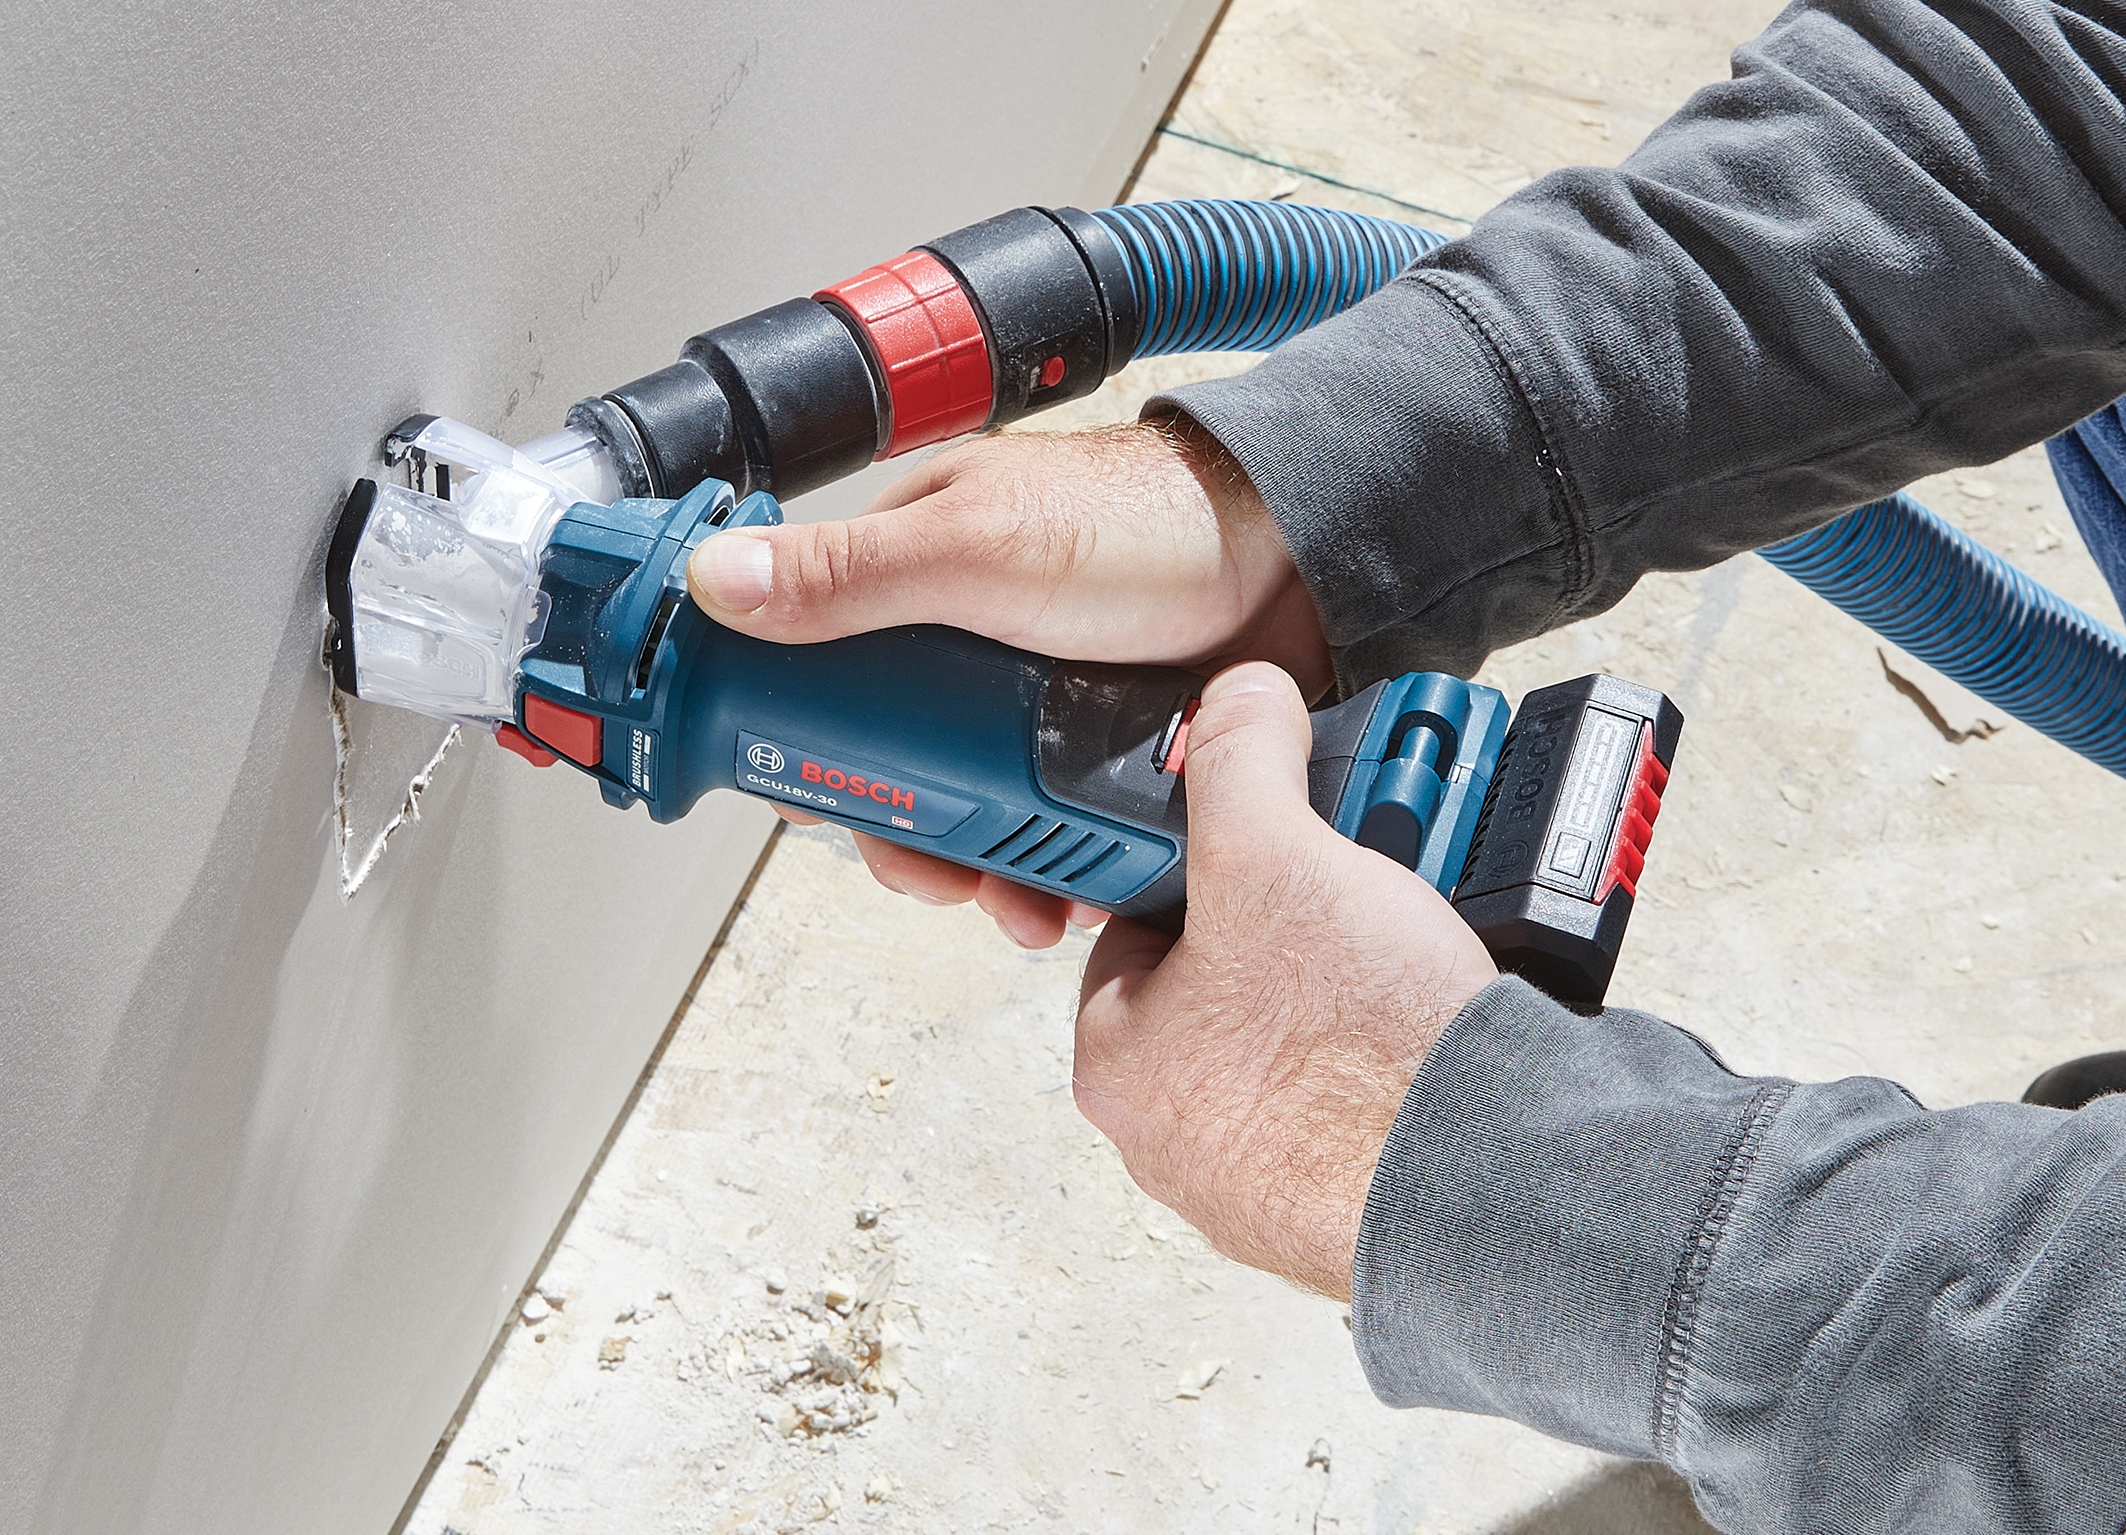 Efficient, ergonomic, better for the body: Three Bosch innovations for  drywall professionals - Bosch Media Service